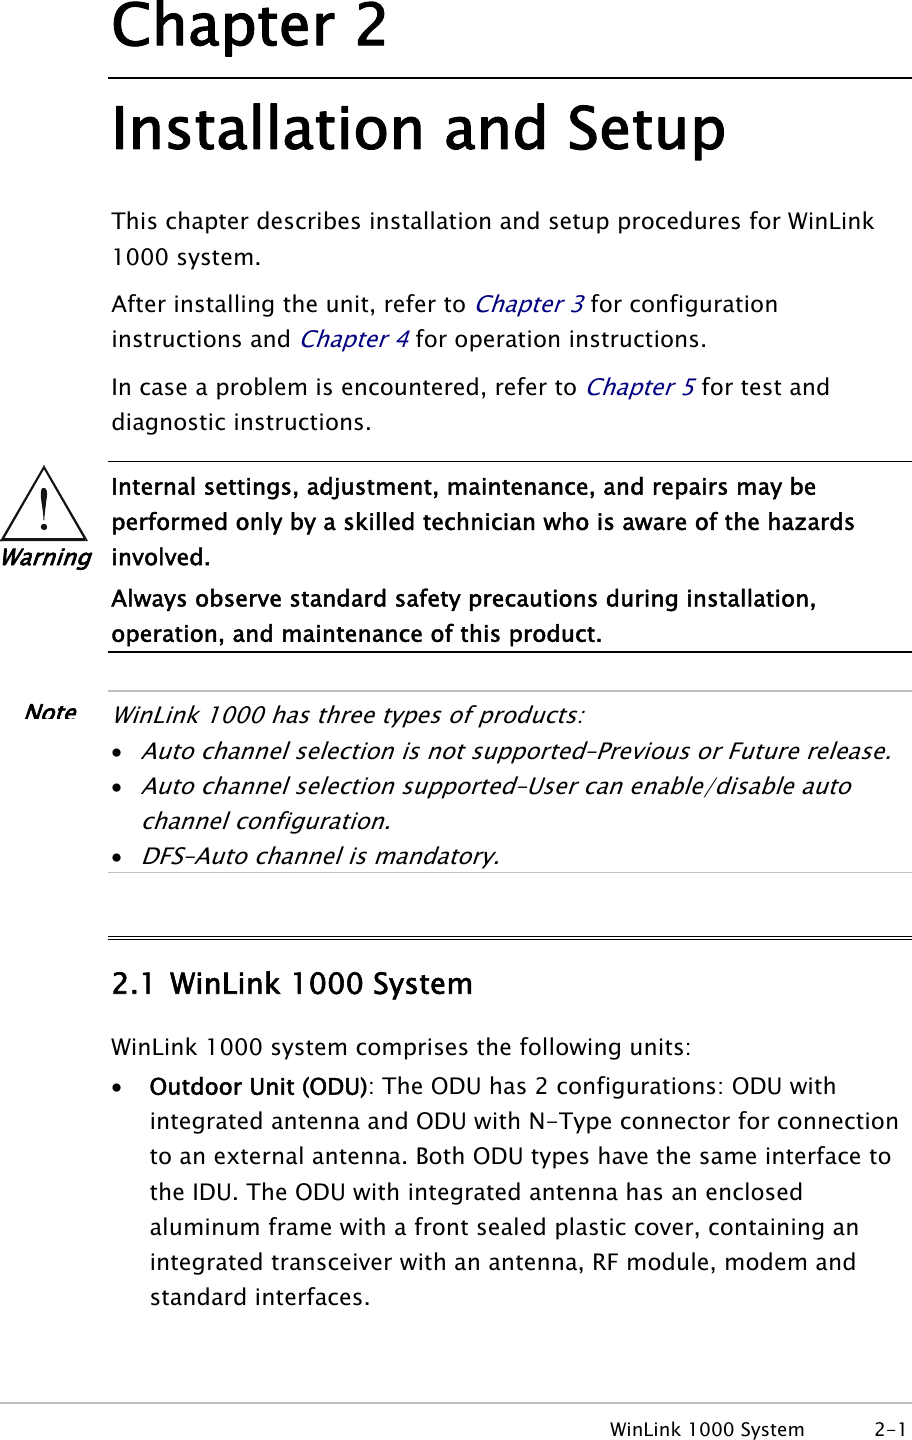  WinLink 1000 System  2-1 Chapter 2 Installation and Setup This chapter describes installation and setup procedures for WinLink 1000 system. After installing the unit, refer to Chapter 3 for configuration instructions and Chapter 4 for operation instructions. In case a problem is encountered, refer to Chapter 5 for test and diagnostic instructions.  Internal settings, adjustment, maintenance, and repairs may be performed only by a skilled technician who is aware of the hazards involved. Always observe standard safety precautions during installation, operation, and maintenance of this product.   WinLink 1000 has three types of products: • Auto channel selection is not supported–Previous or Future release. • Auto channel selection supported–User can enable/disable auto channel configuration. • DFS–Auto channel is mandatory.  2.1 WinLink 1000 System WinLink 1000 system comprises the following units: • Outdoor Unit (ODU): The ODU has 2 configurations: ODU with integrated antenna and ODU with N-Type connector for connection to an external antenna. Both ODU types have the same interface to the IDU. The ODU with integrated antenna has an enclosed aluminum frame with a front sealed plastic cover, containing an integrated transceiver with an antenna, RF module, modem and standard interfaces. Warning Note